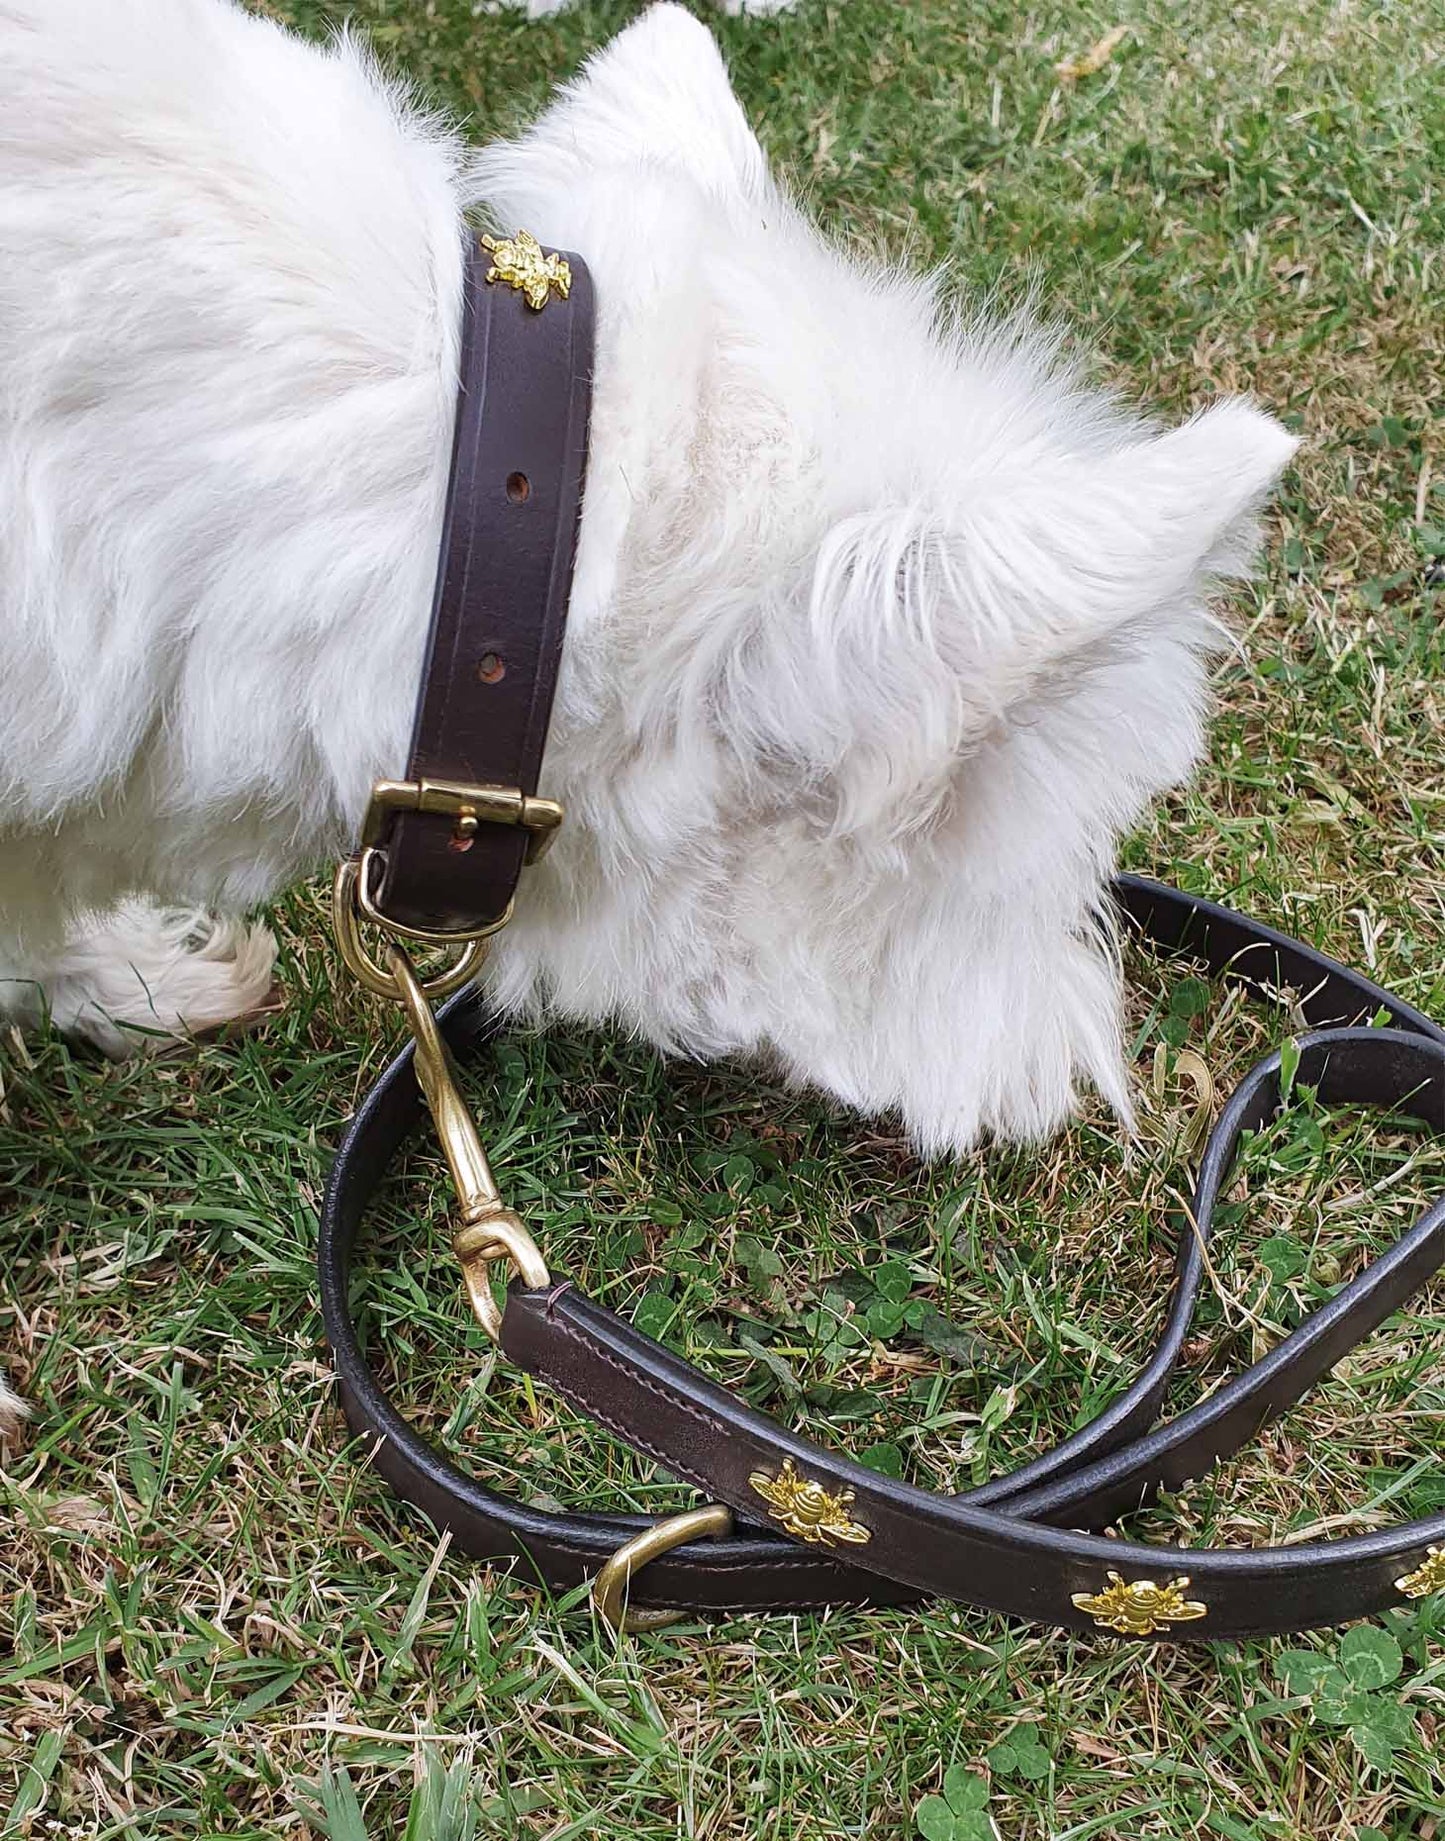 'The Bumble' Dark Brown Leather 'Bee' rivets Dog Lead.